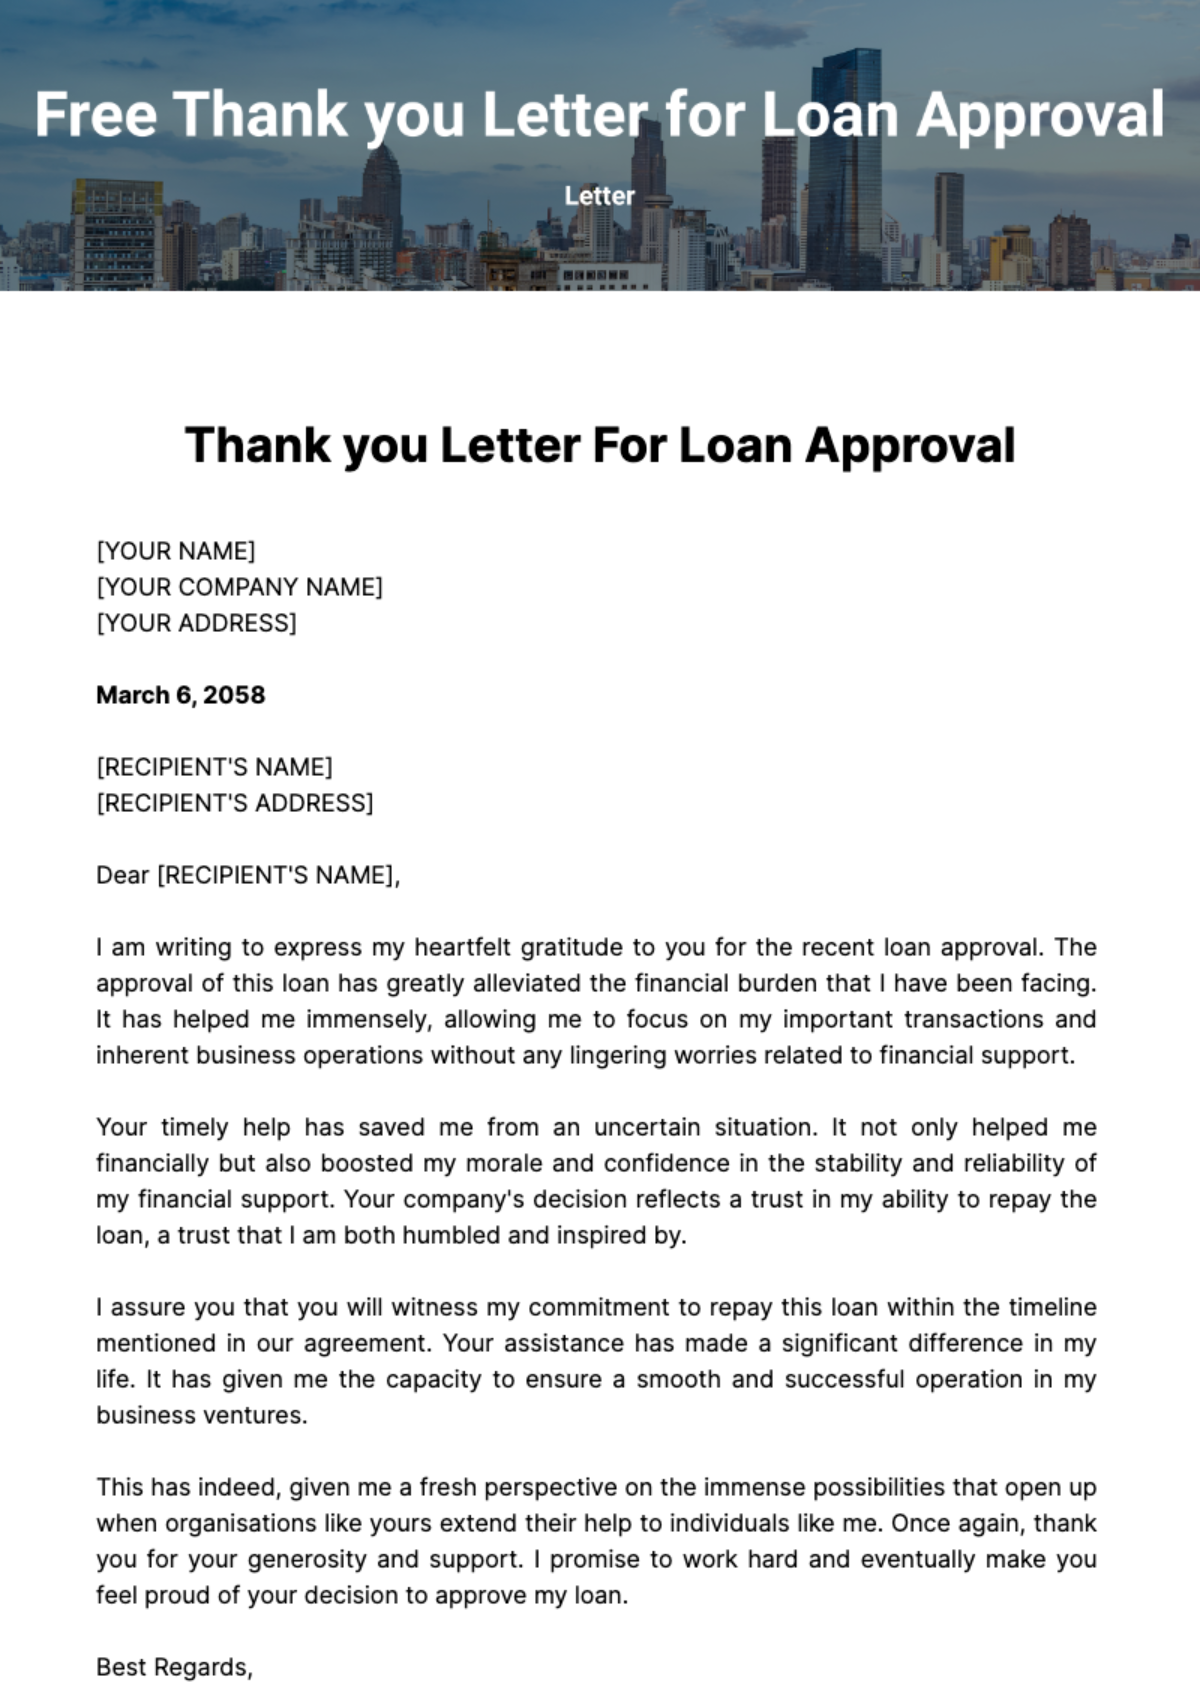 Thank you Letter for Loan Approval Template